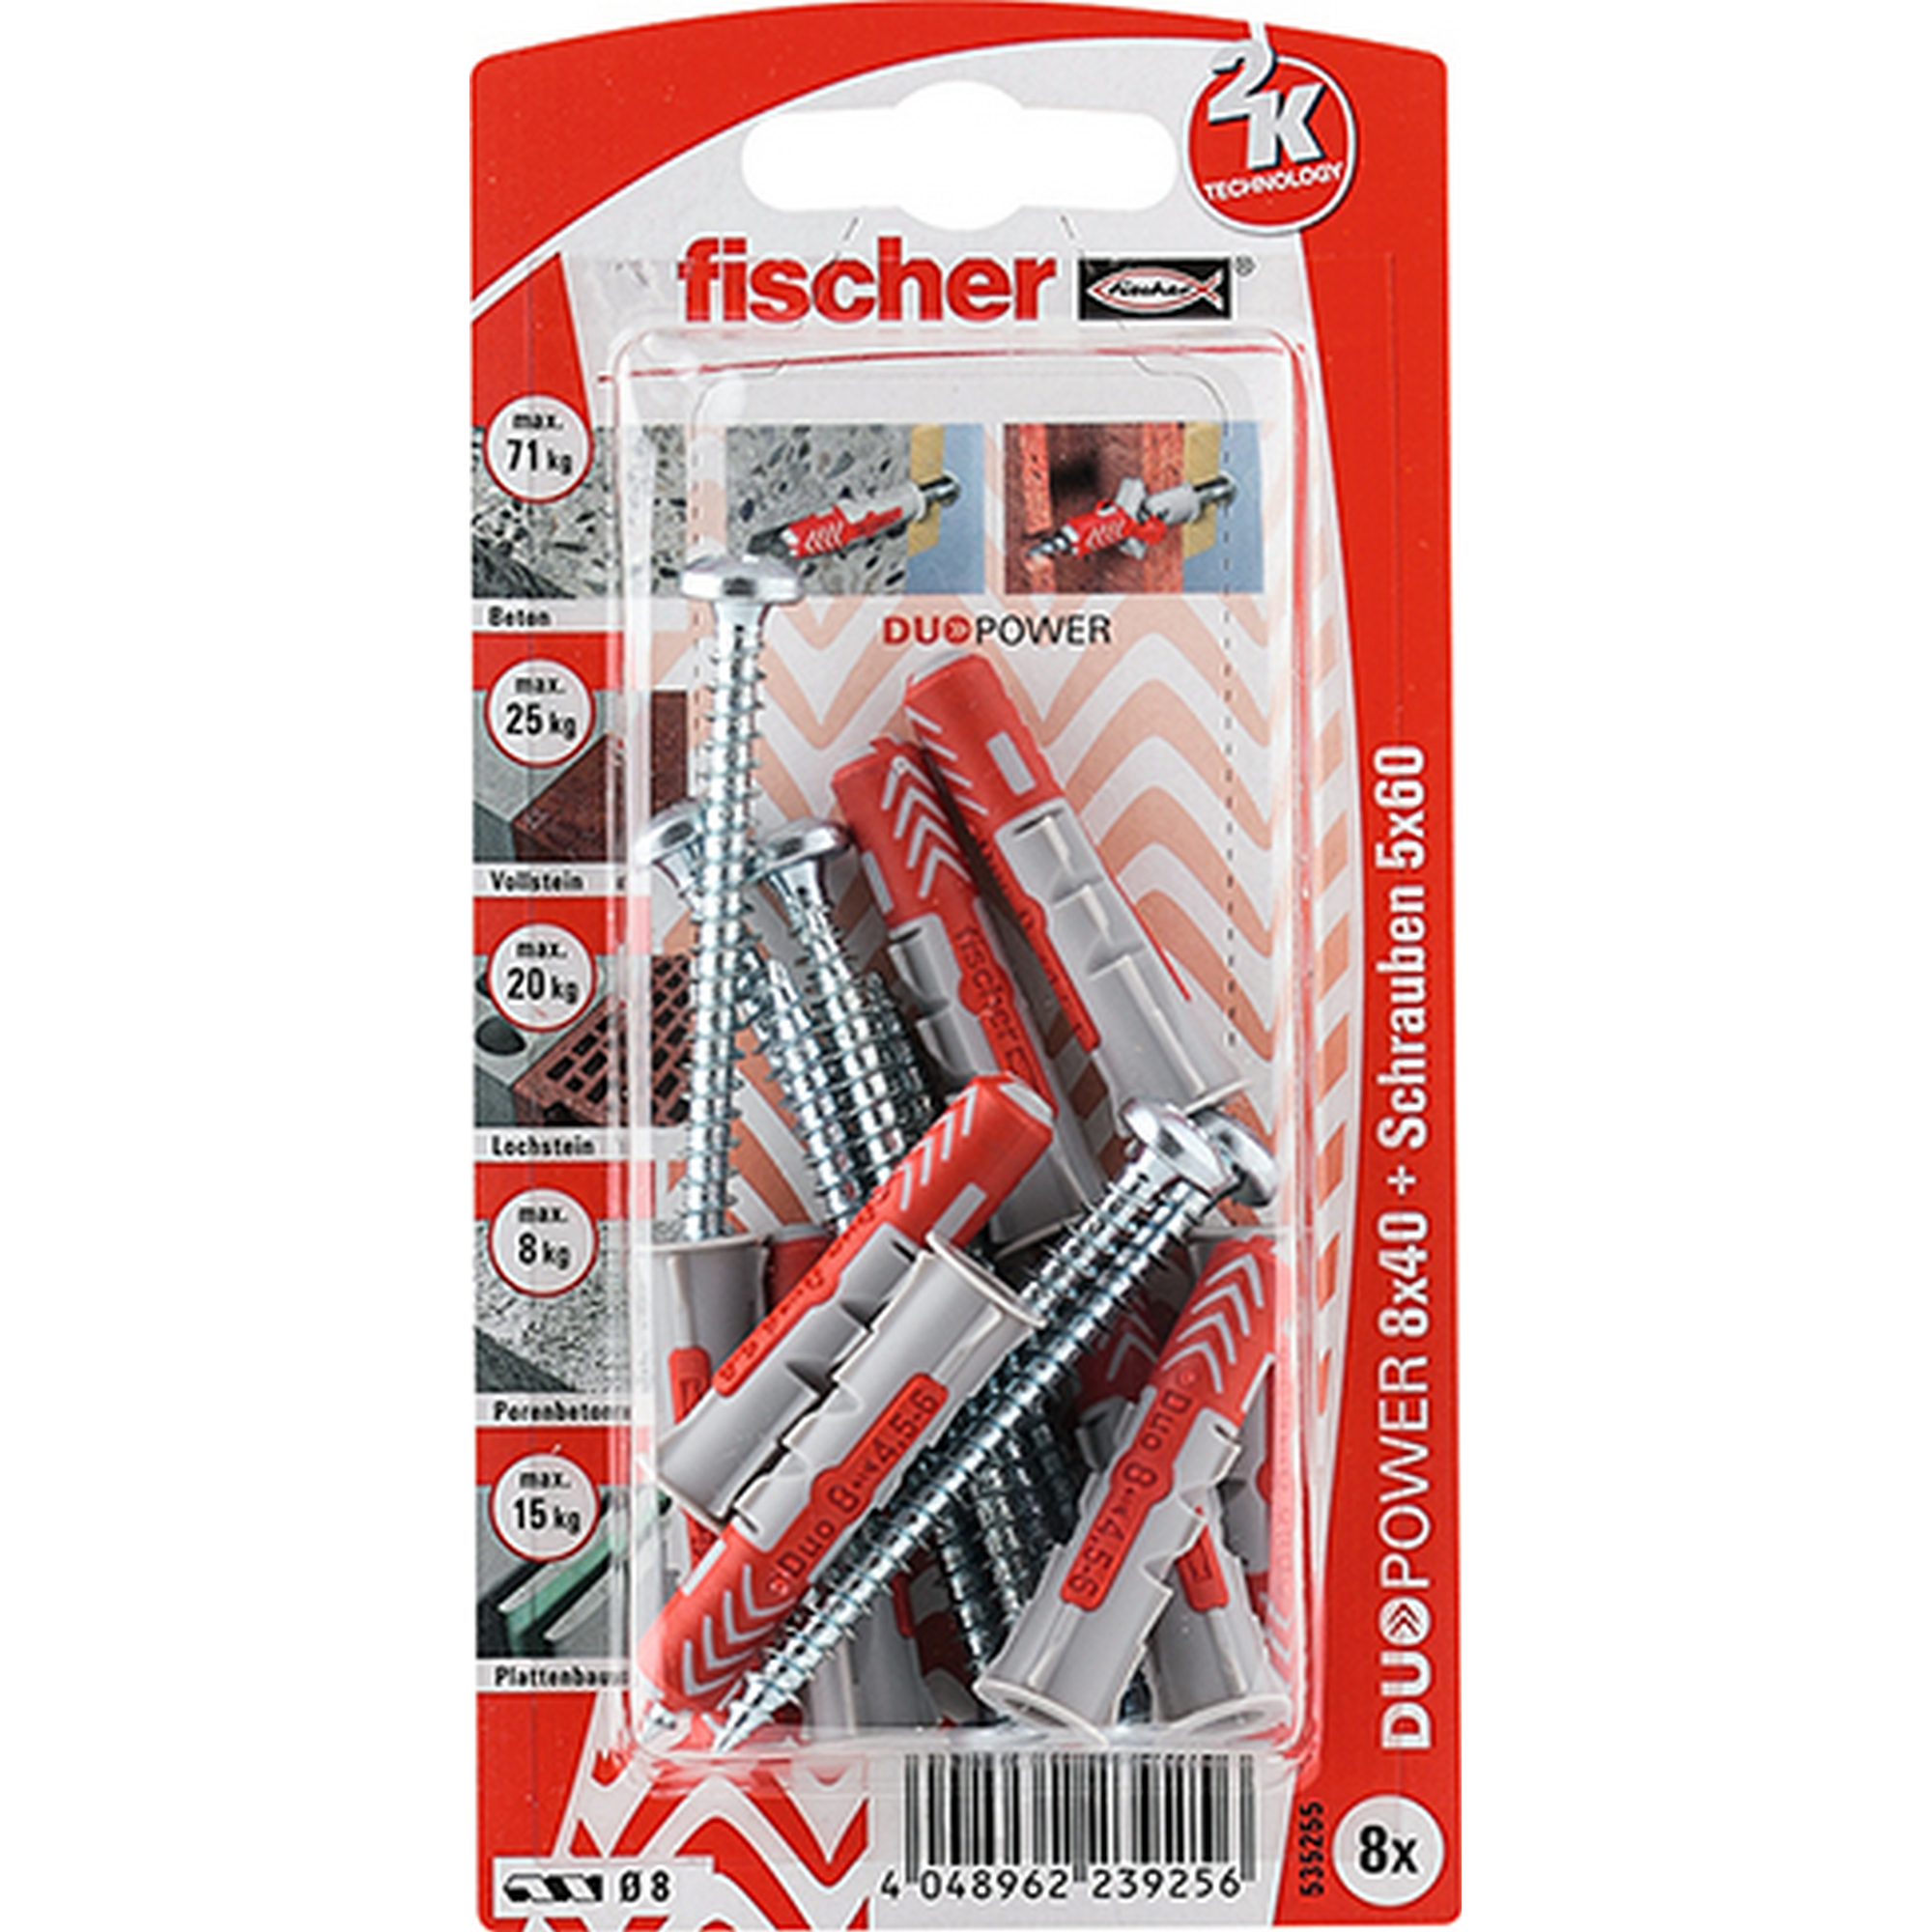 fischer DUOPOWER 8 x 40 S PH 8 Stück + product picture